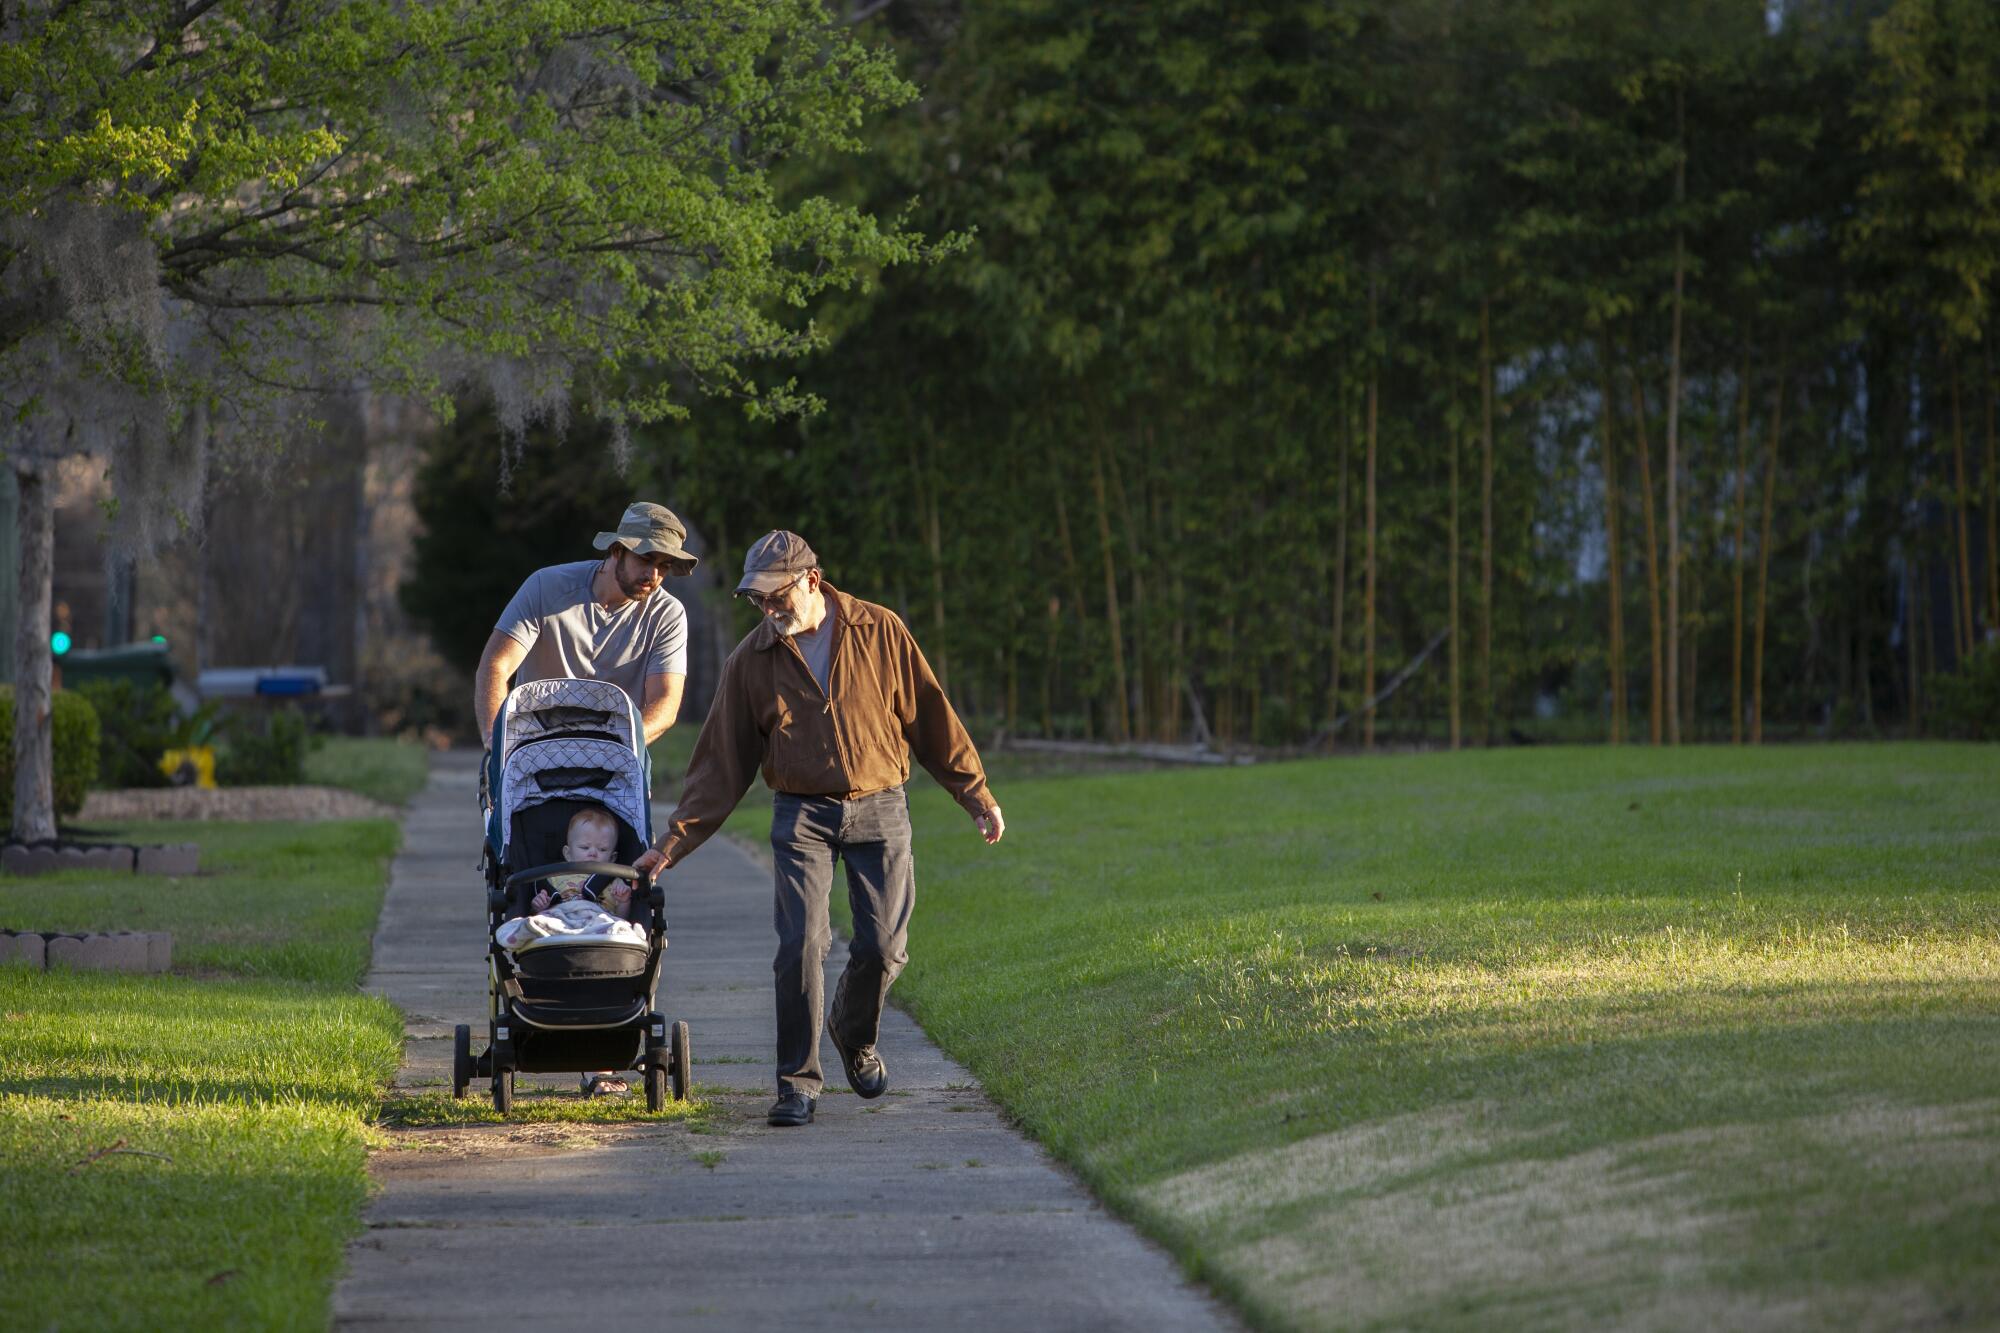 Two men with children in a stroller at a park